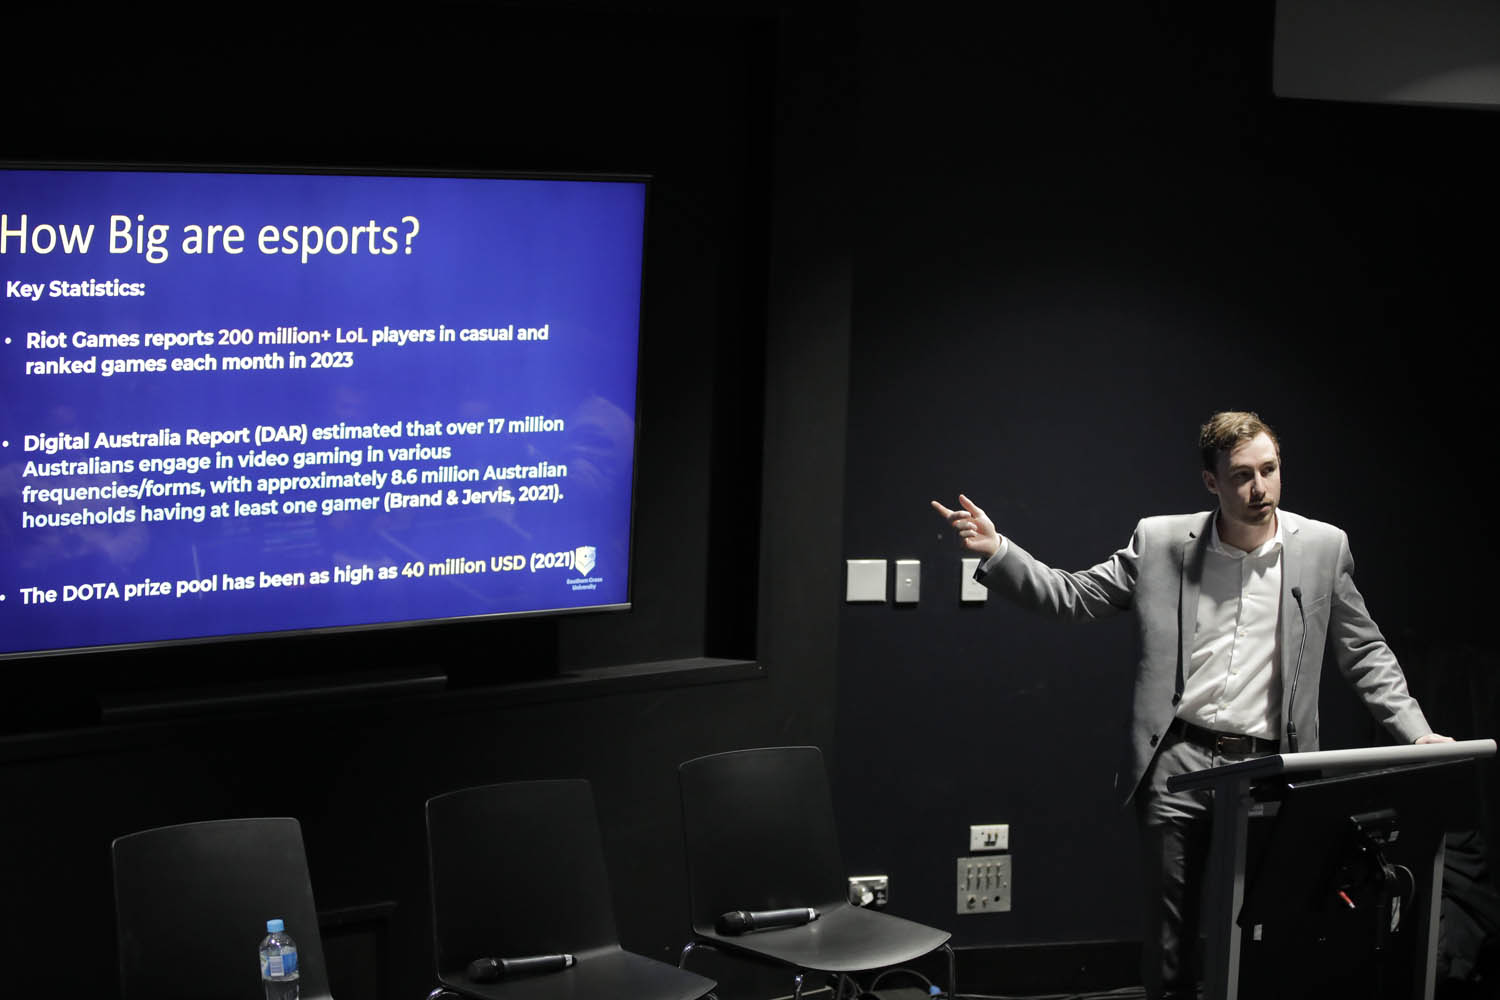 A man in a grey suit stands at a lectern, pointing to a screen with the title 'how big are esports? Key statistics: Riot Games reports 200m+ players in casual and ranked games each month in 2023. Digital Australia Report estimated that over 17m Australians engage in video gaming in various forms, approx 8.6m Aust housholds have at least 1 gamer/ the DOTA prize pool has been as high as $40m US.